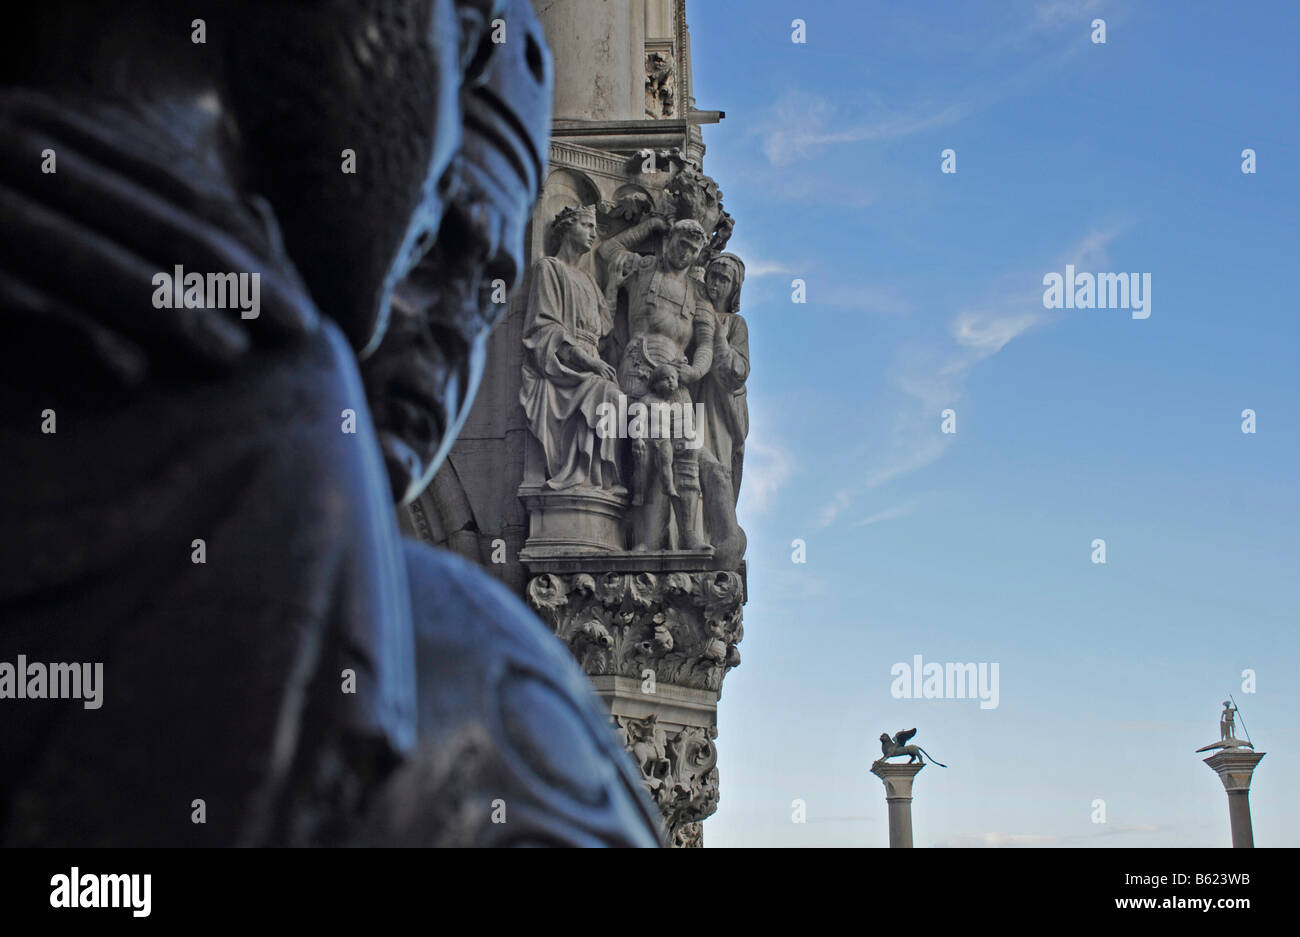 Porphyry statue of the Roman tetrarchs, detail, Piazza San Marco Square, Venice, Italy, Europe Stock Photo